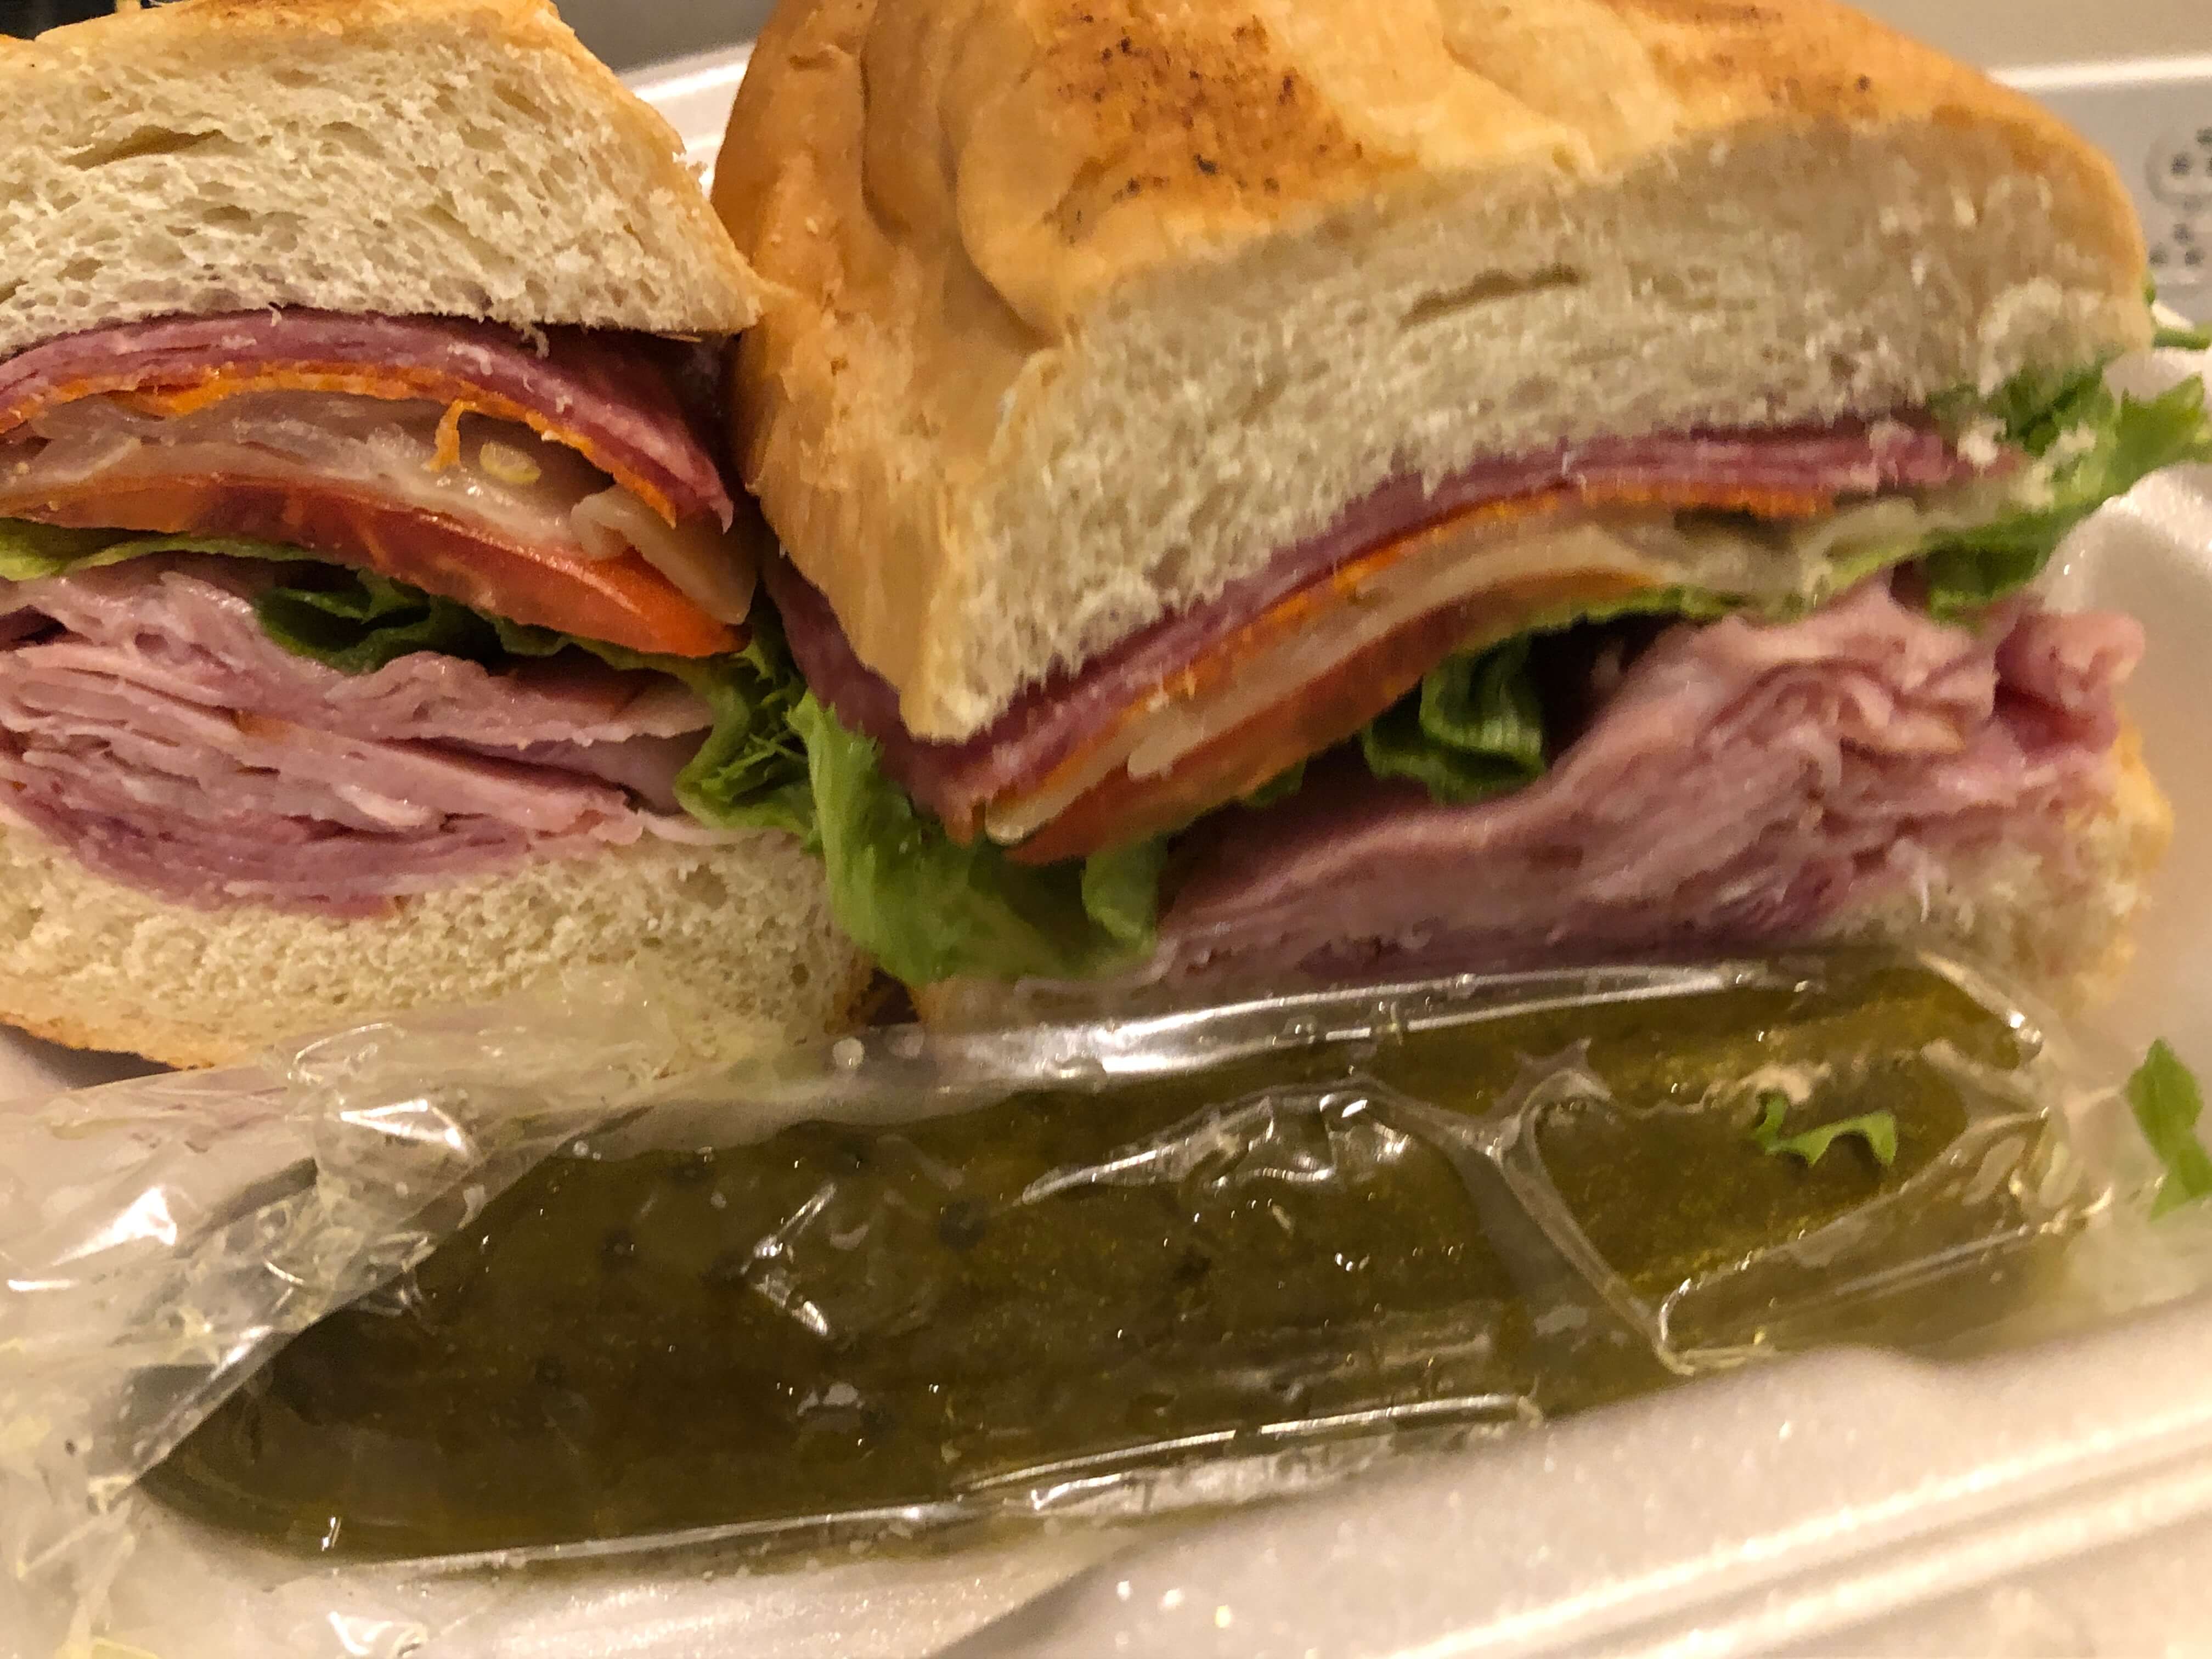 a sandwich with various Italian meats, lettuce, and tomato on French bread with a pickle